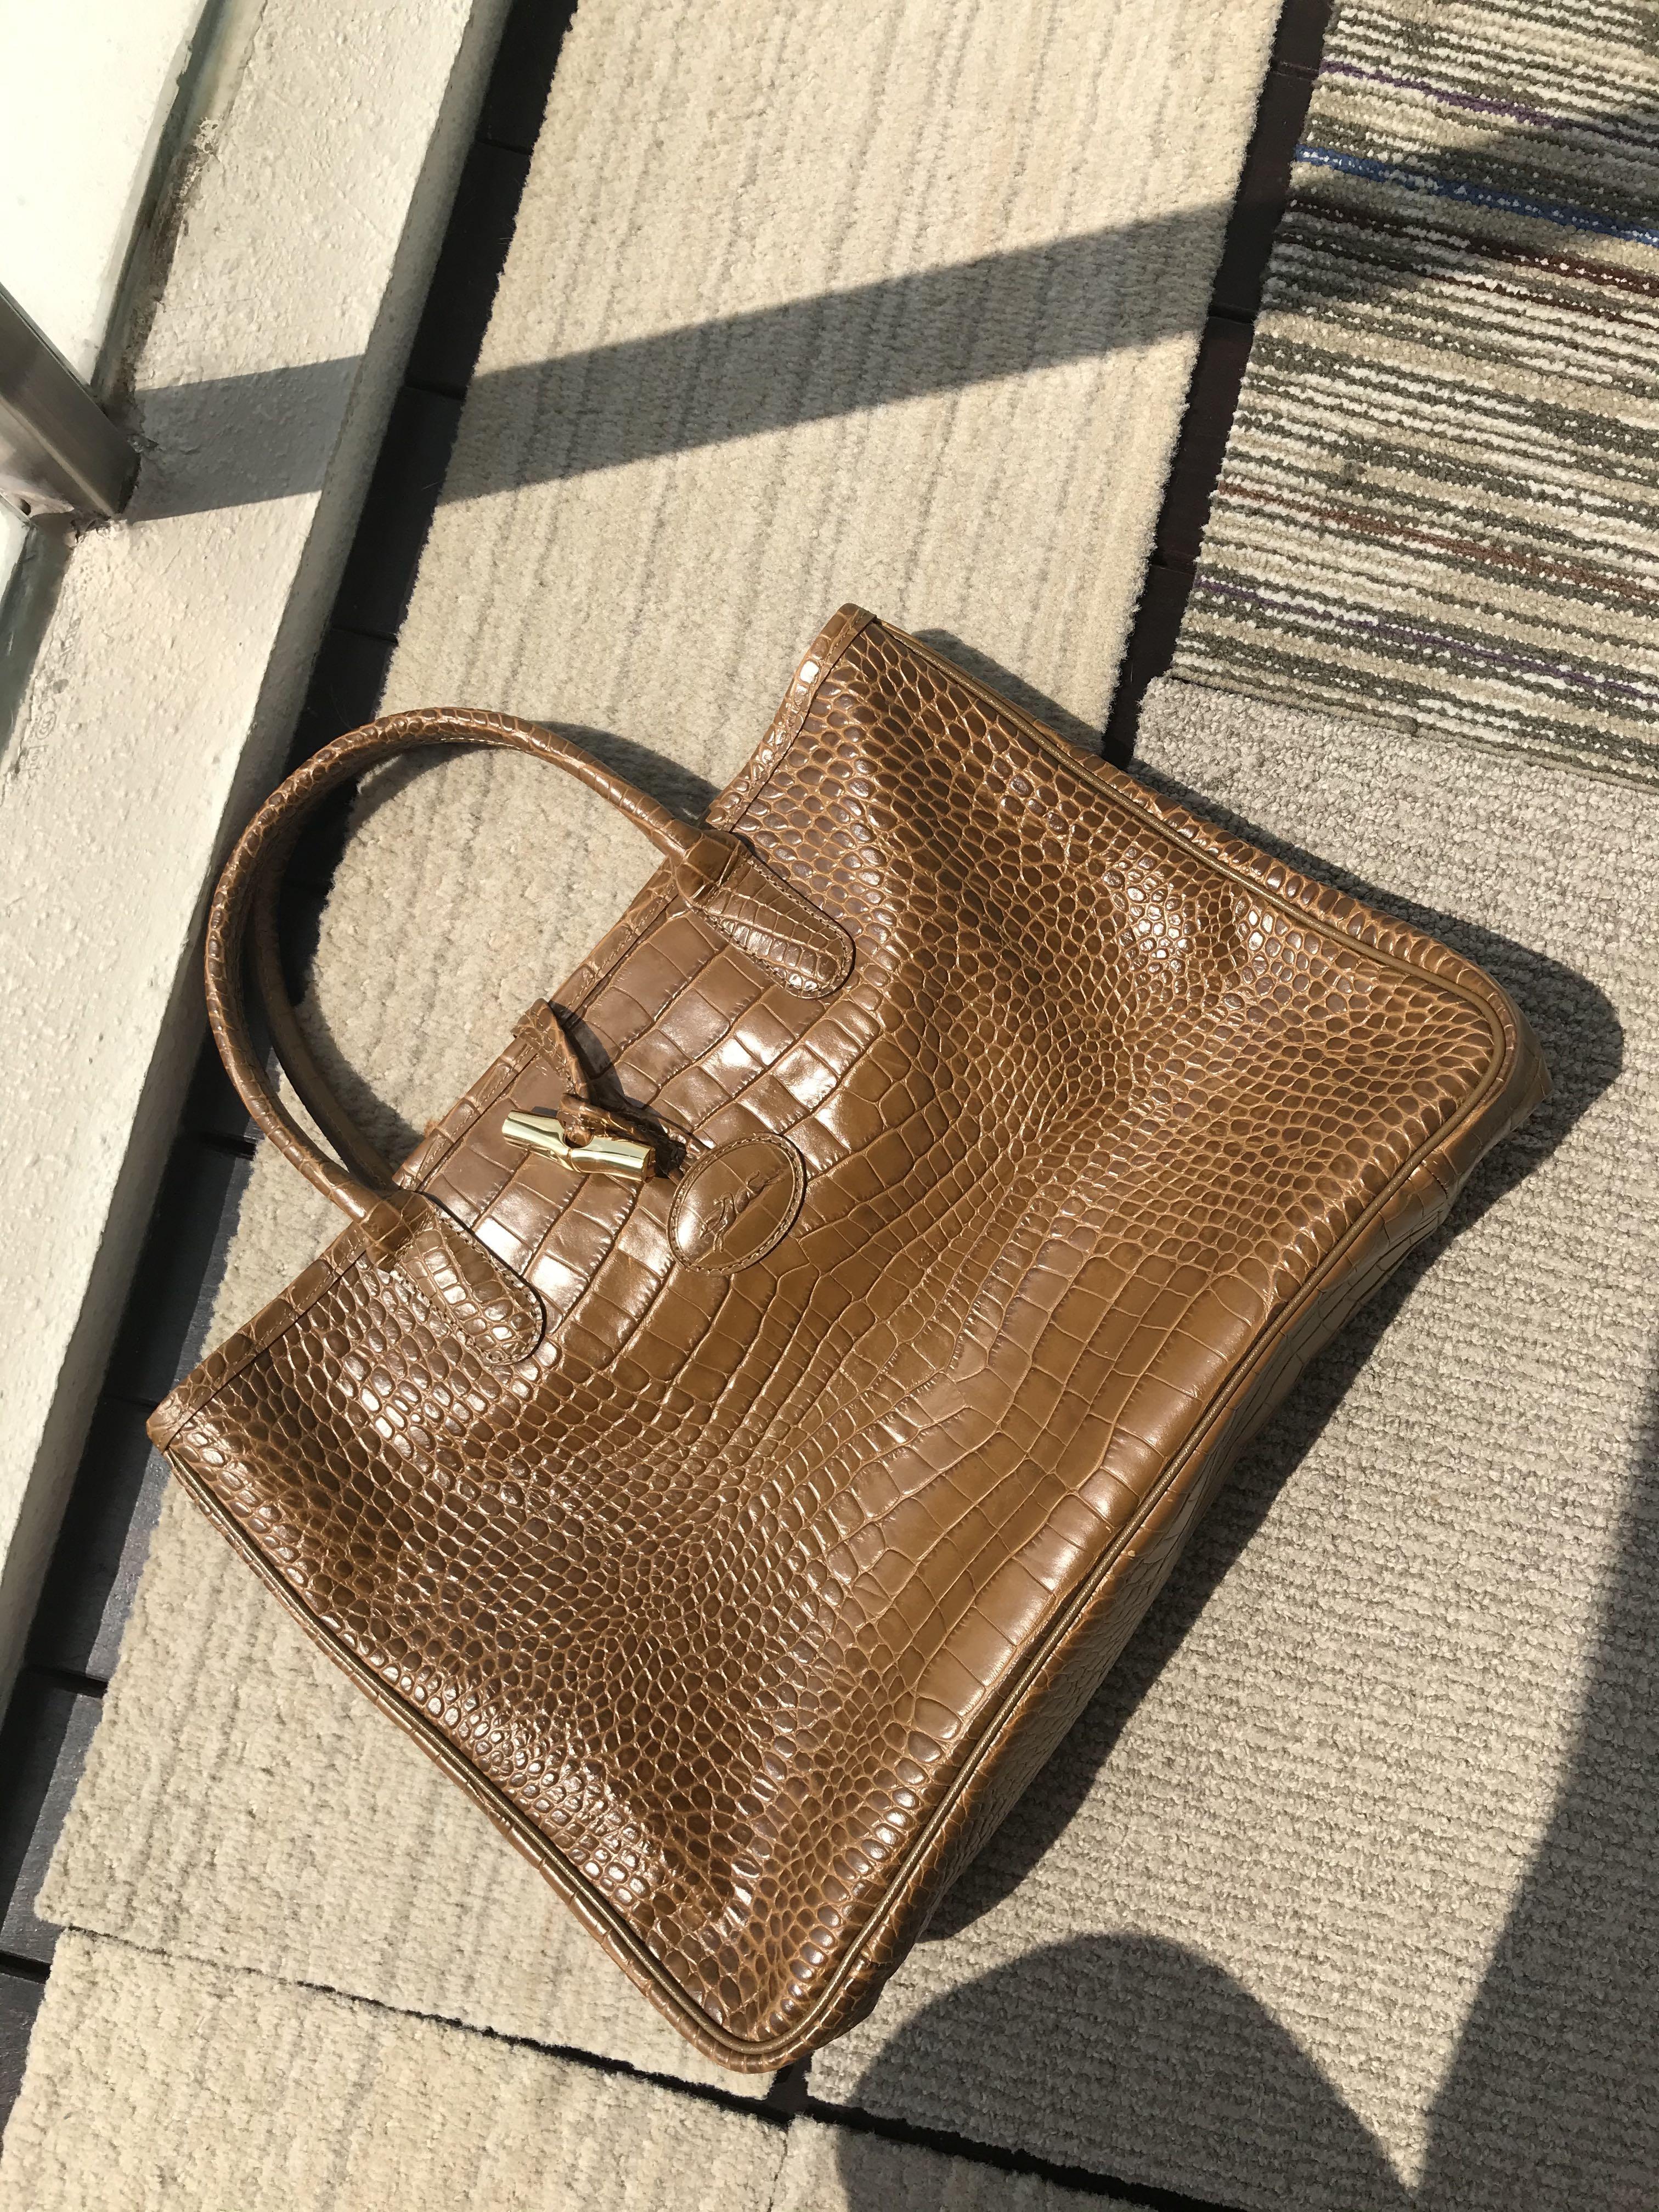 Longchamp Roseau Croc Embossed Leather Bag - Tote - Shopper - Authentic -  Used